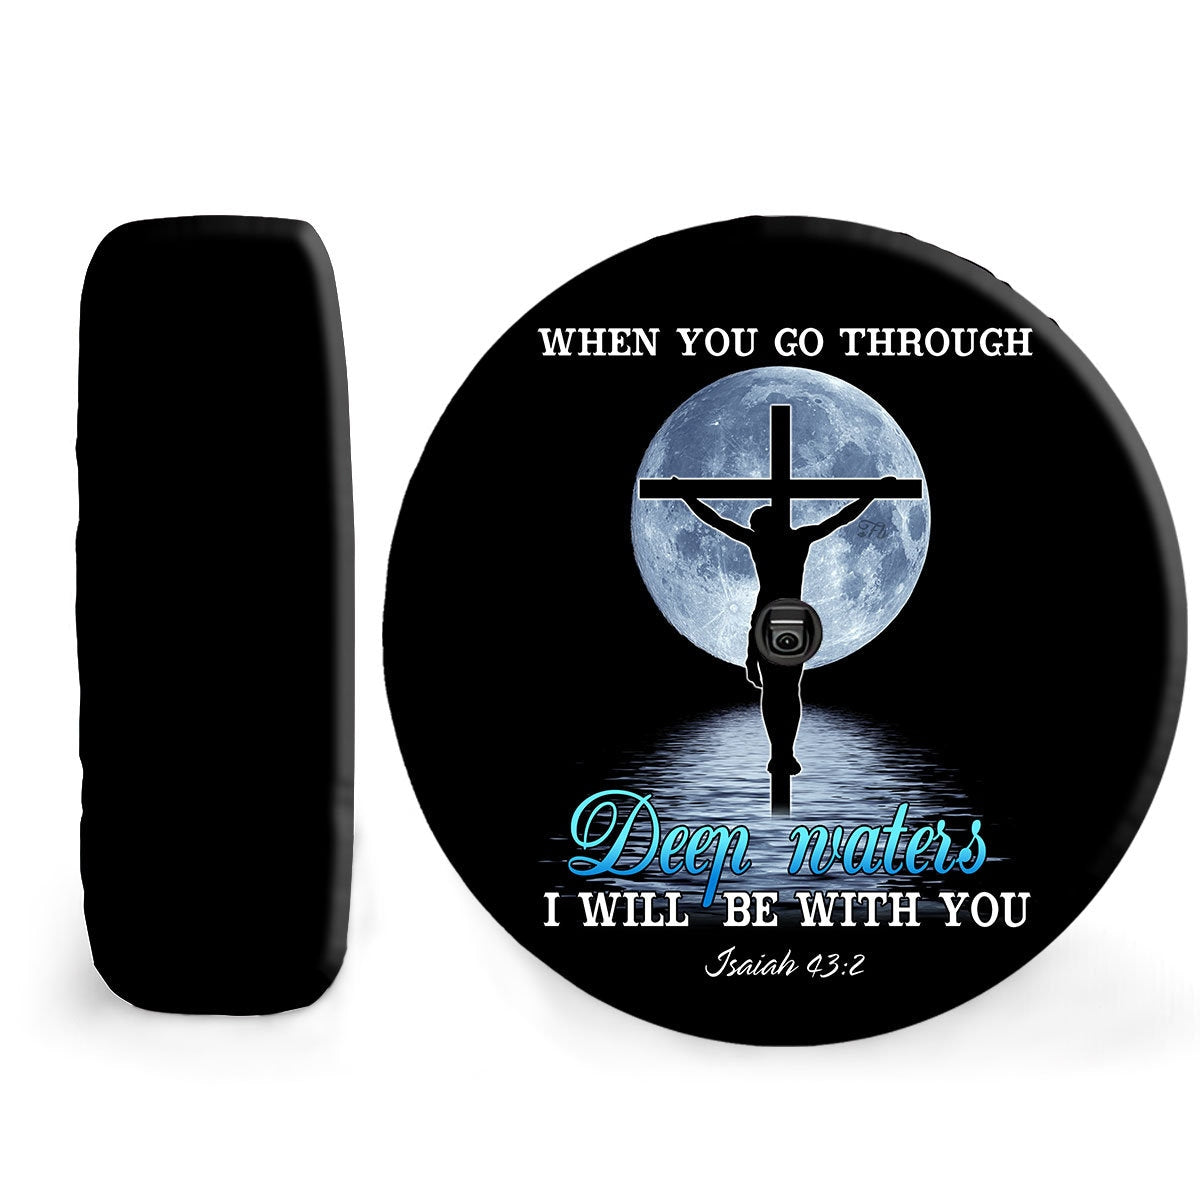 Jesus Christ Holy Bible Trailer Spare Tire Cover Christian Tire Covers - Christian Tire Cover